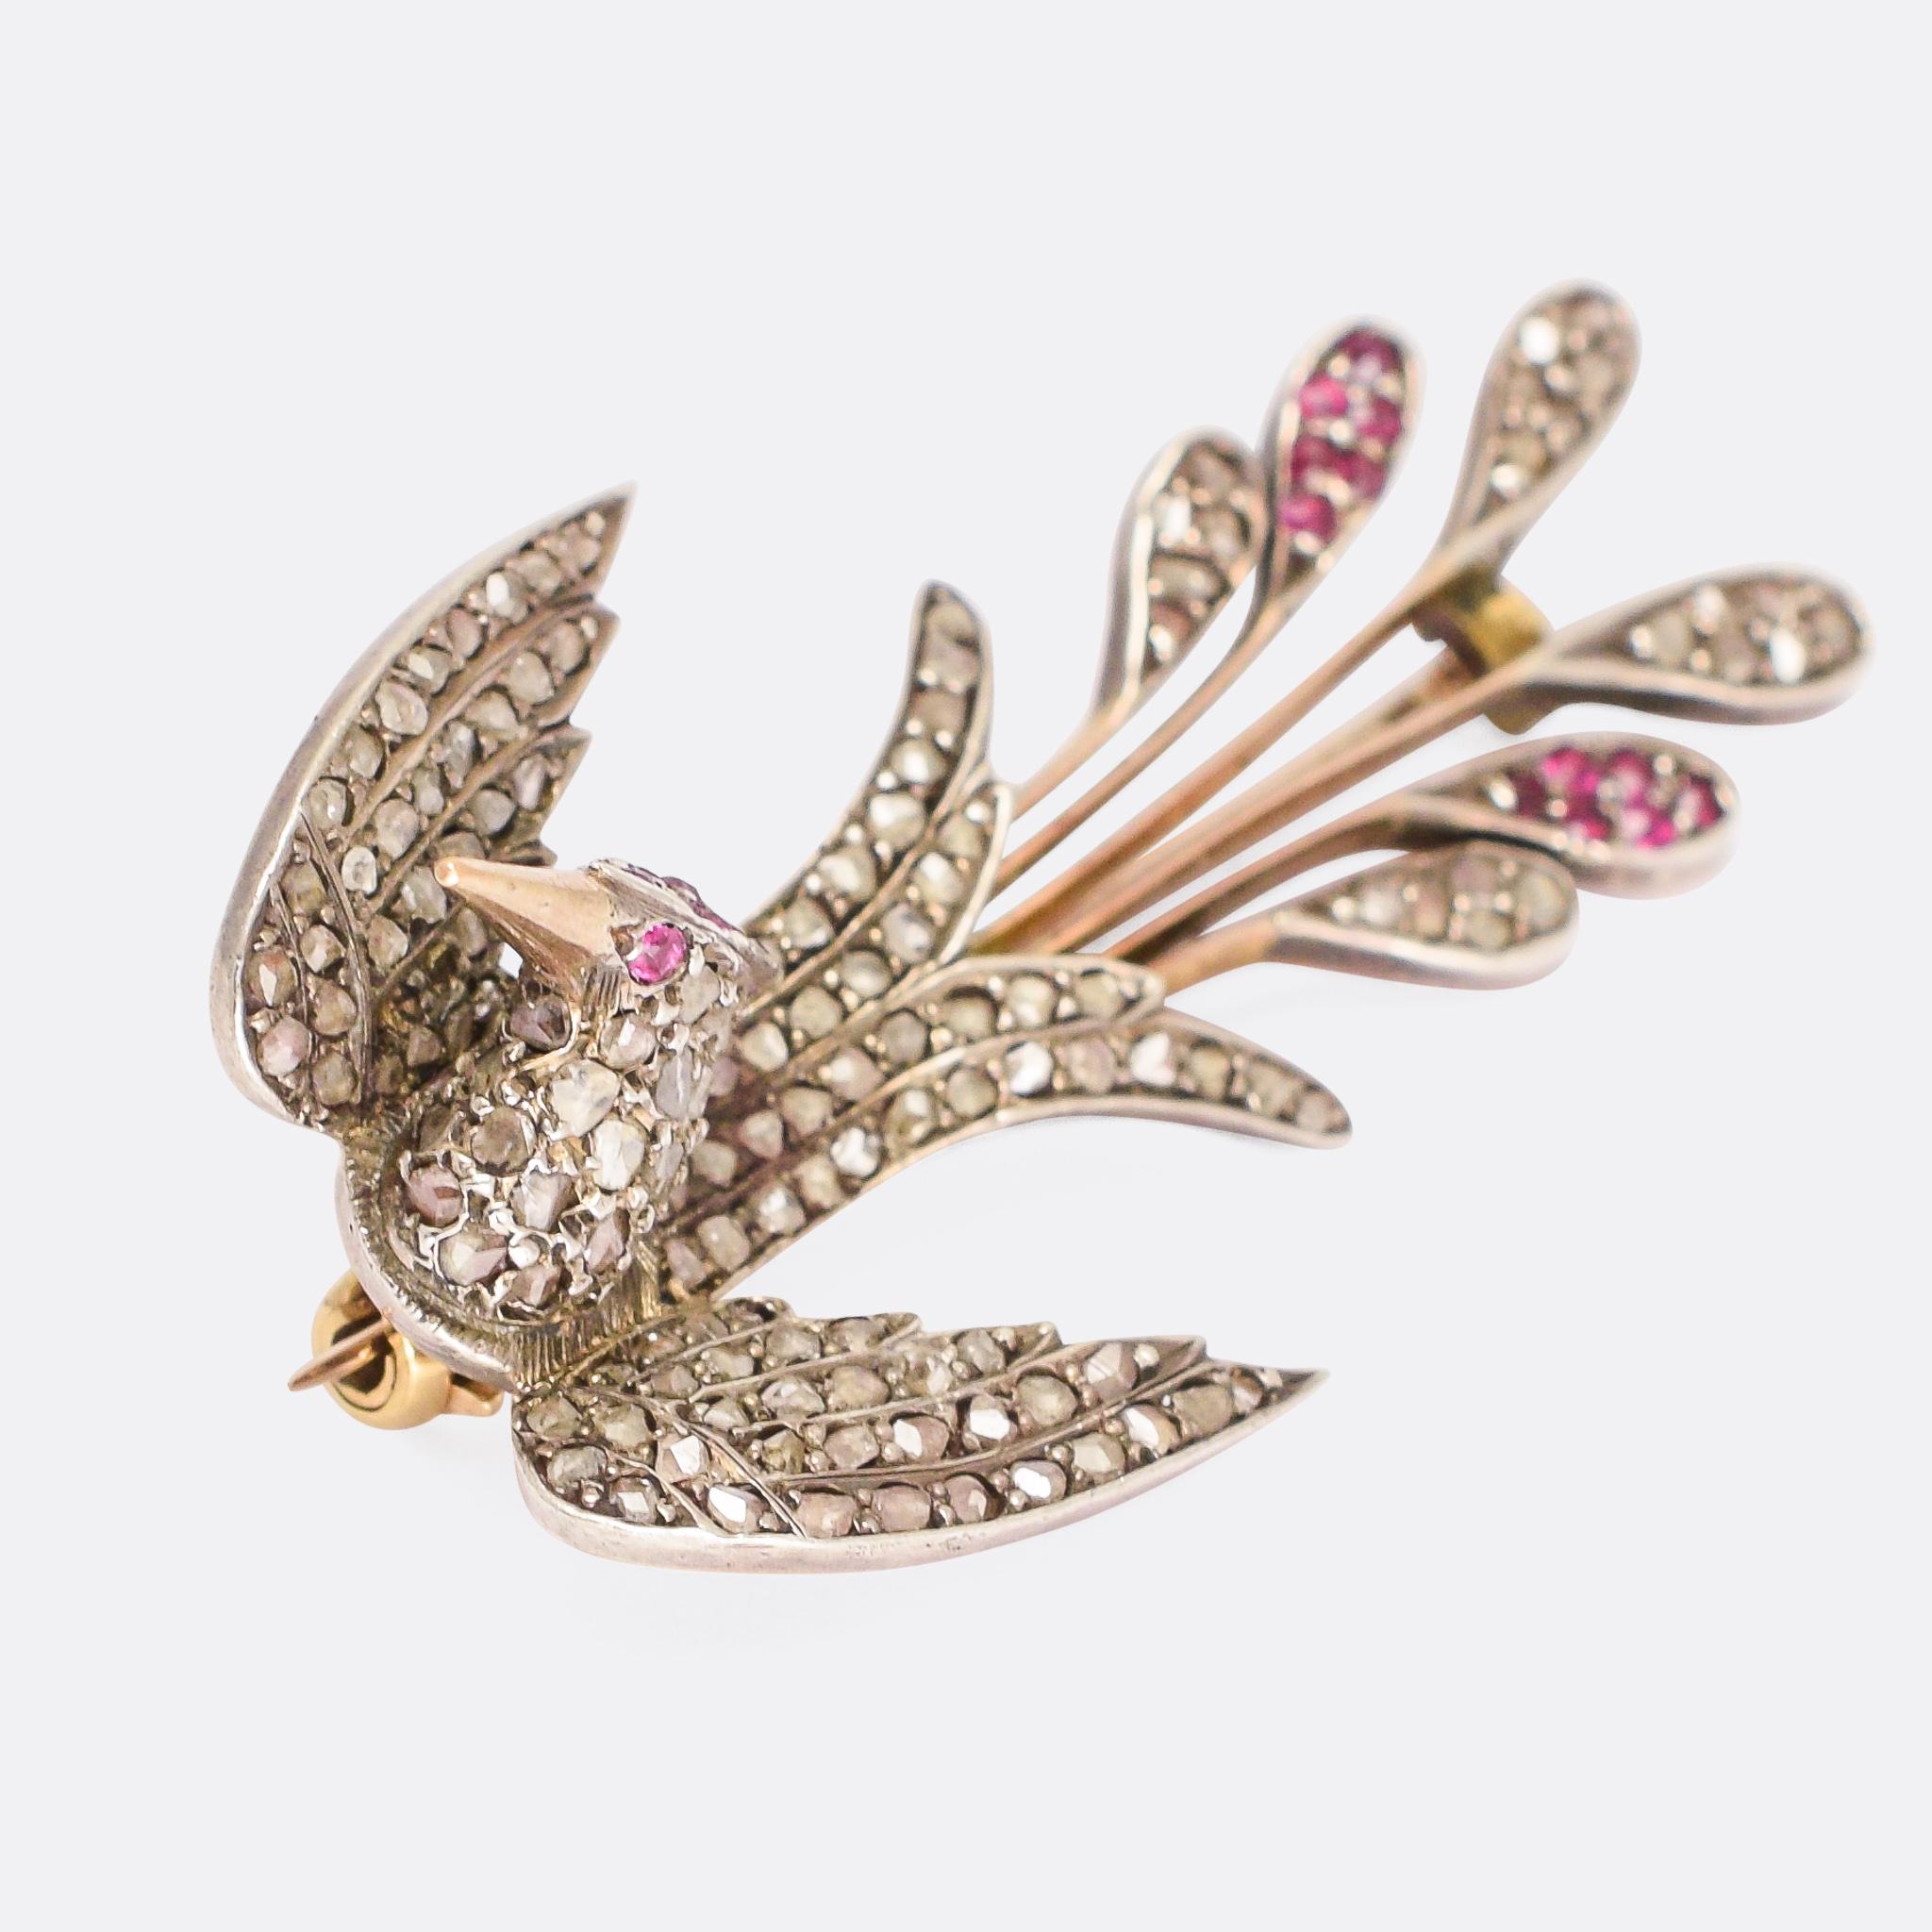 A stunning antique phoenix brooch, masterfully worked and fully set with rose cut diamonds and rubies. It’s perfectly formed, with a crest, elongated beak and a plume of fiery tail feathers. It dates from the Victorian period, modelled in 9 karat